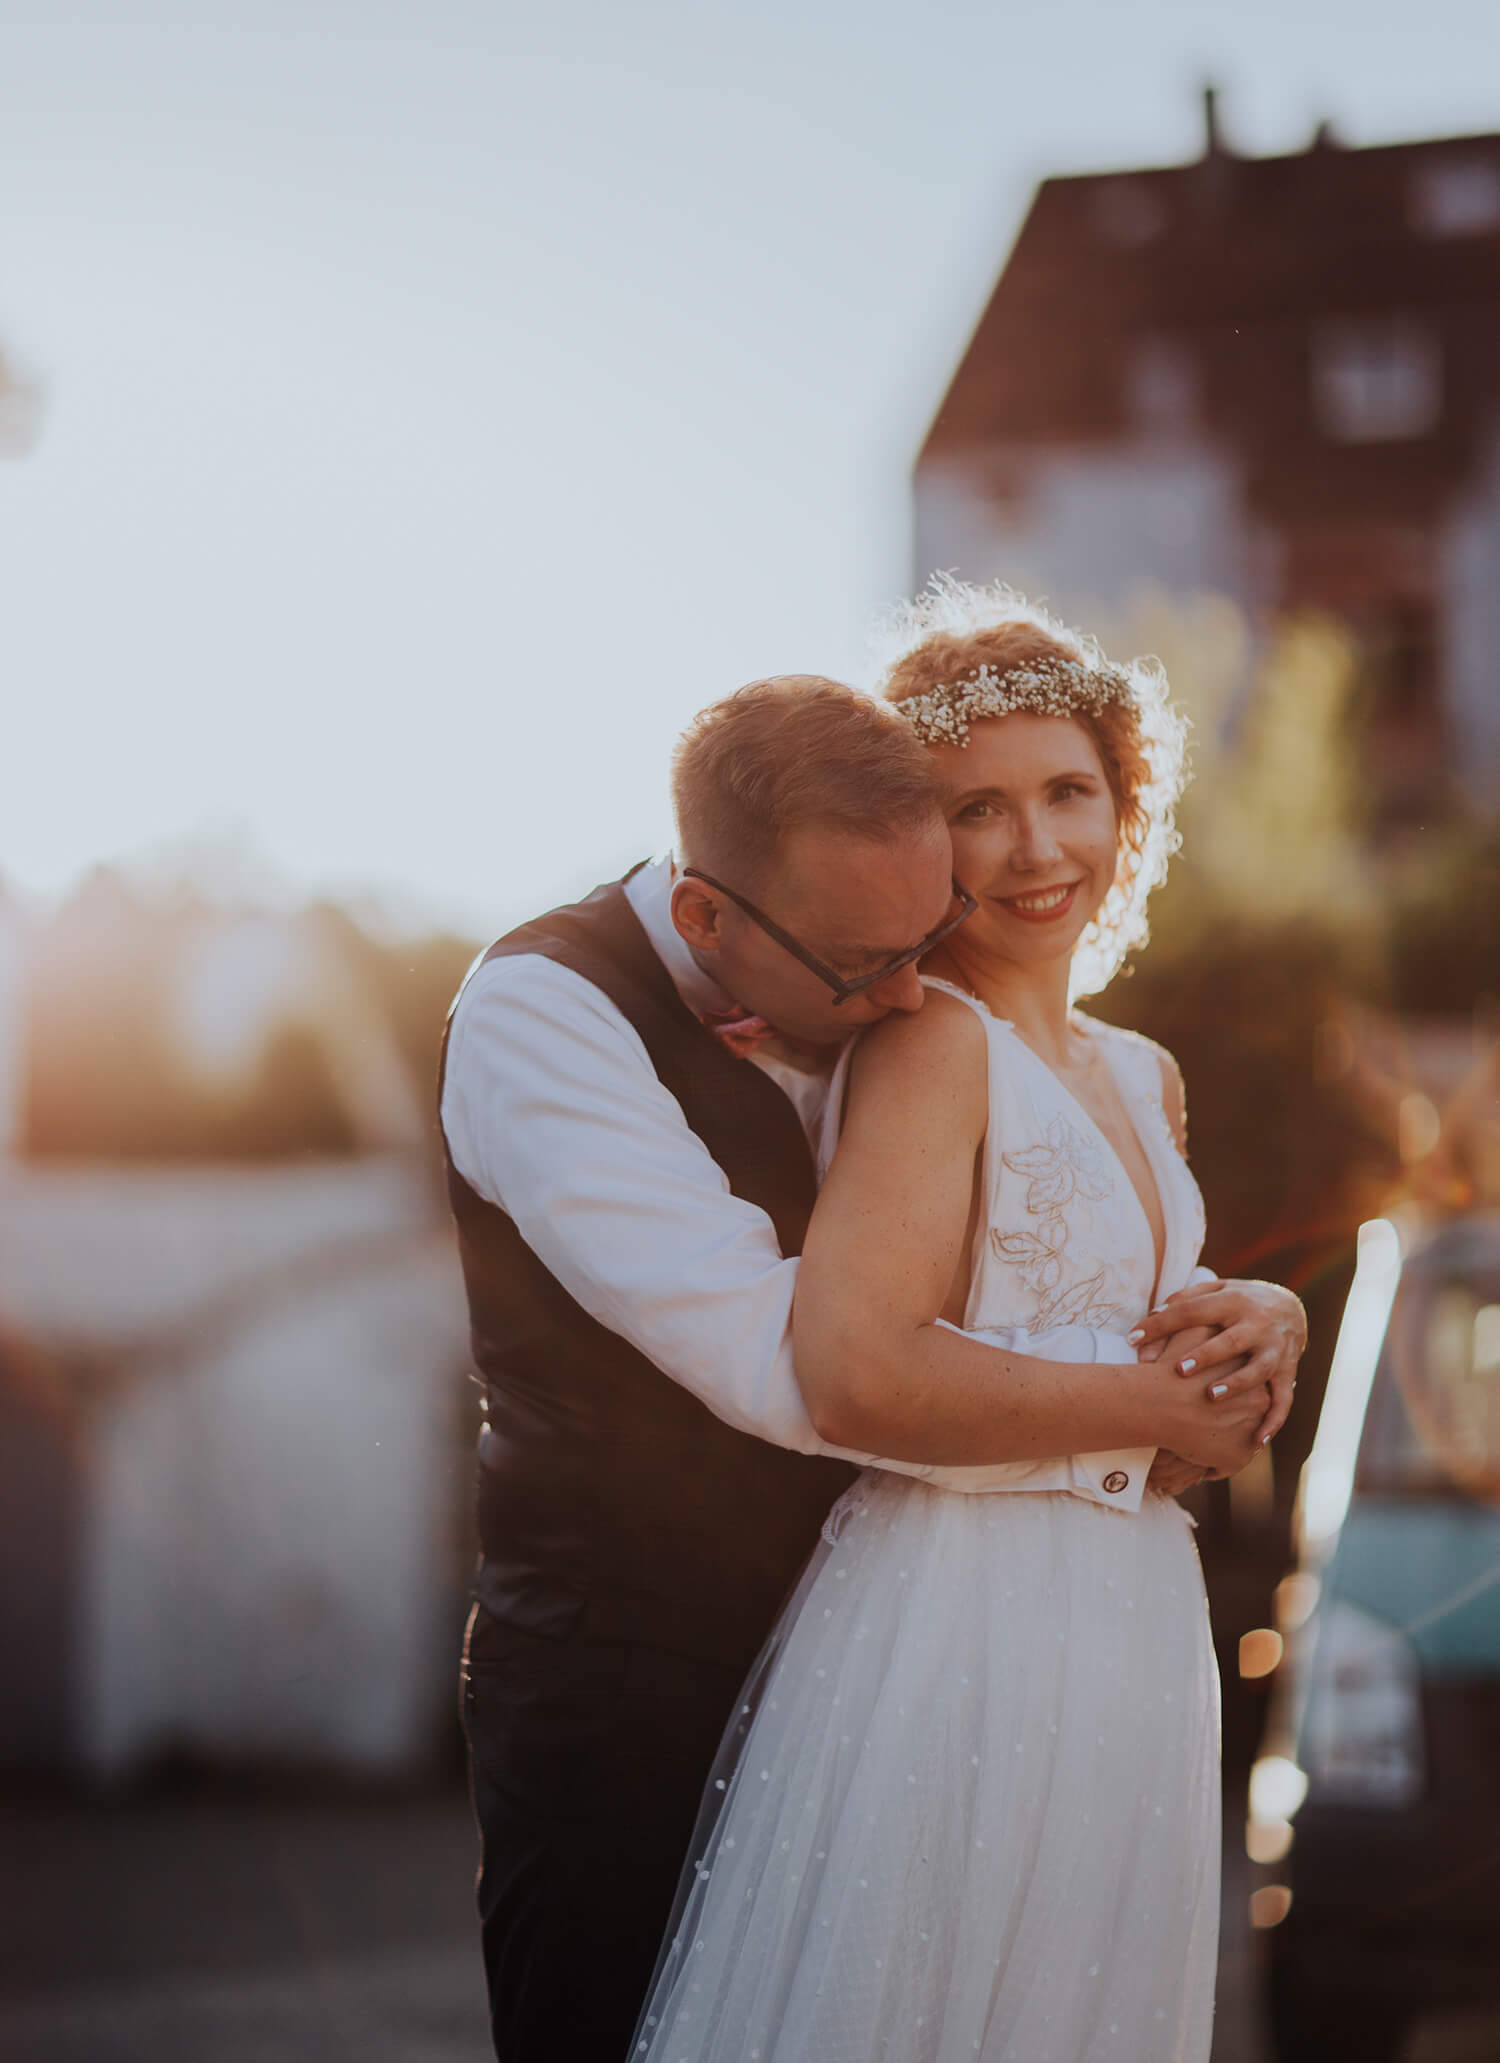 Wedding-Update-Couple-Shooting-during-our-Wedding-Party-Kationette-Lifestyleblogger-NRW-Brautpaarshooting